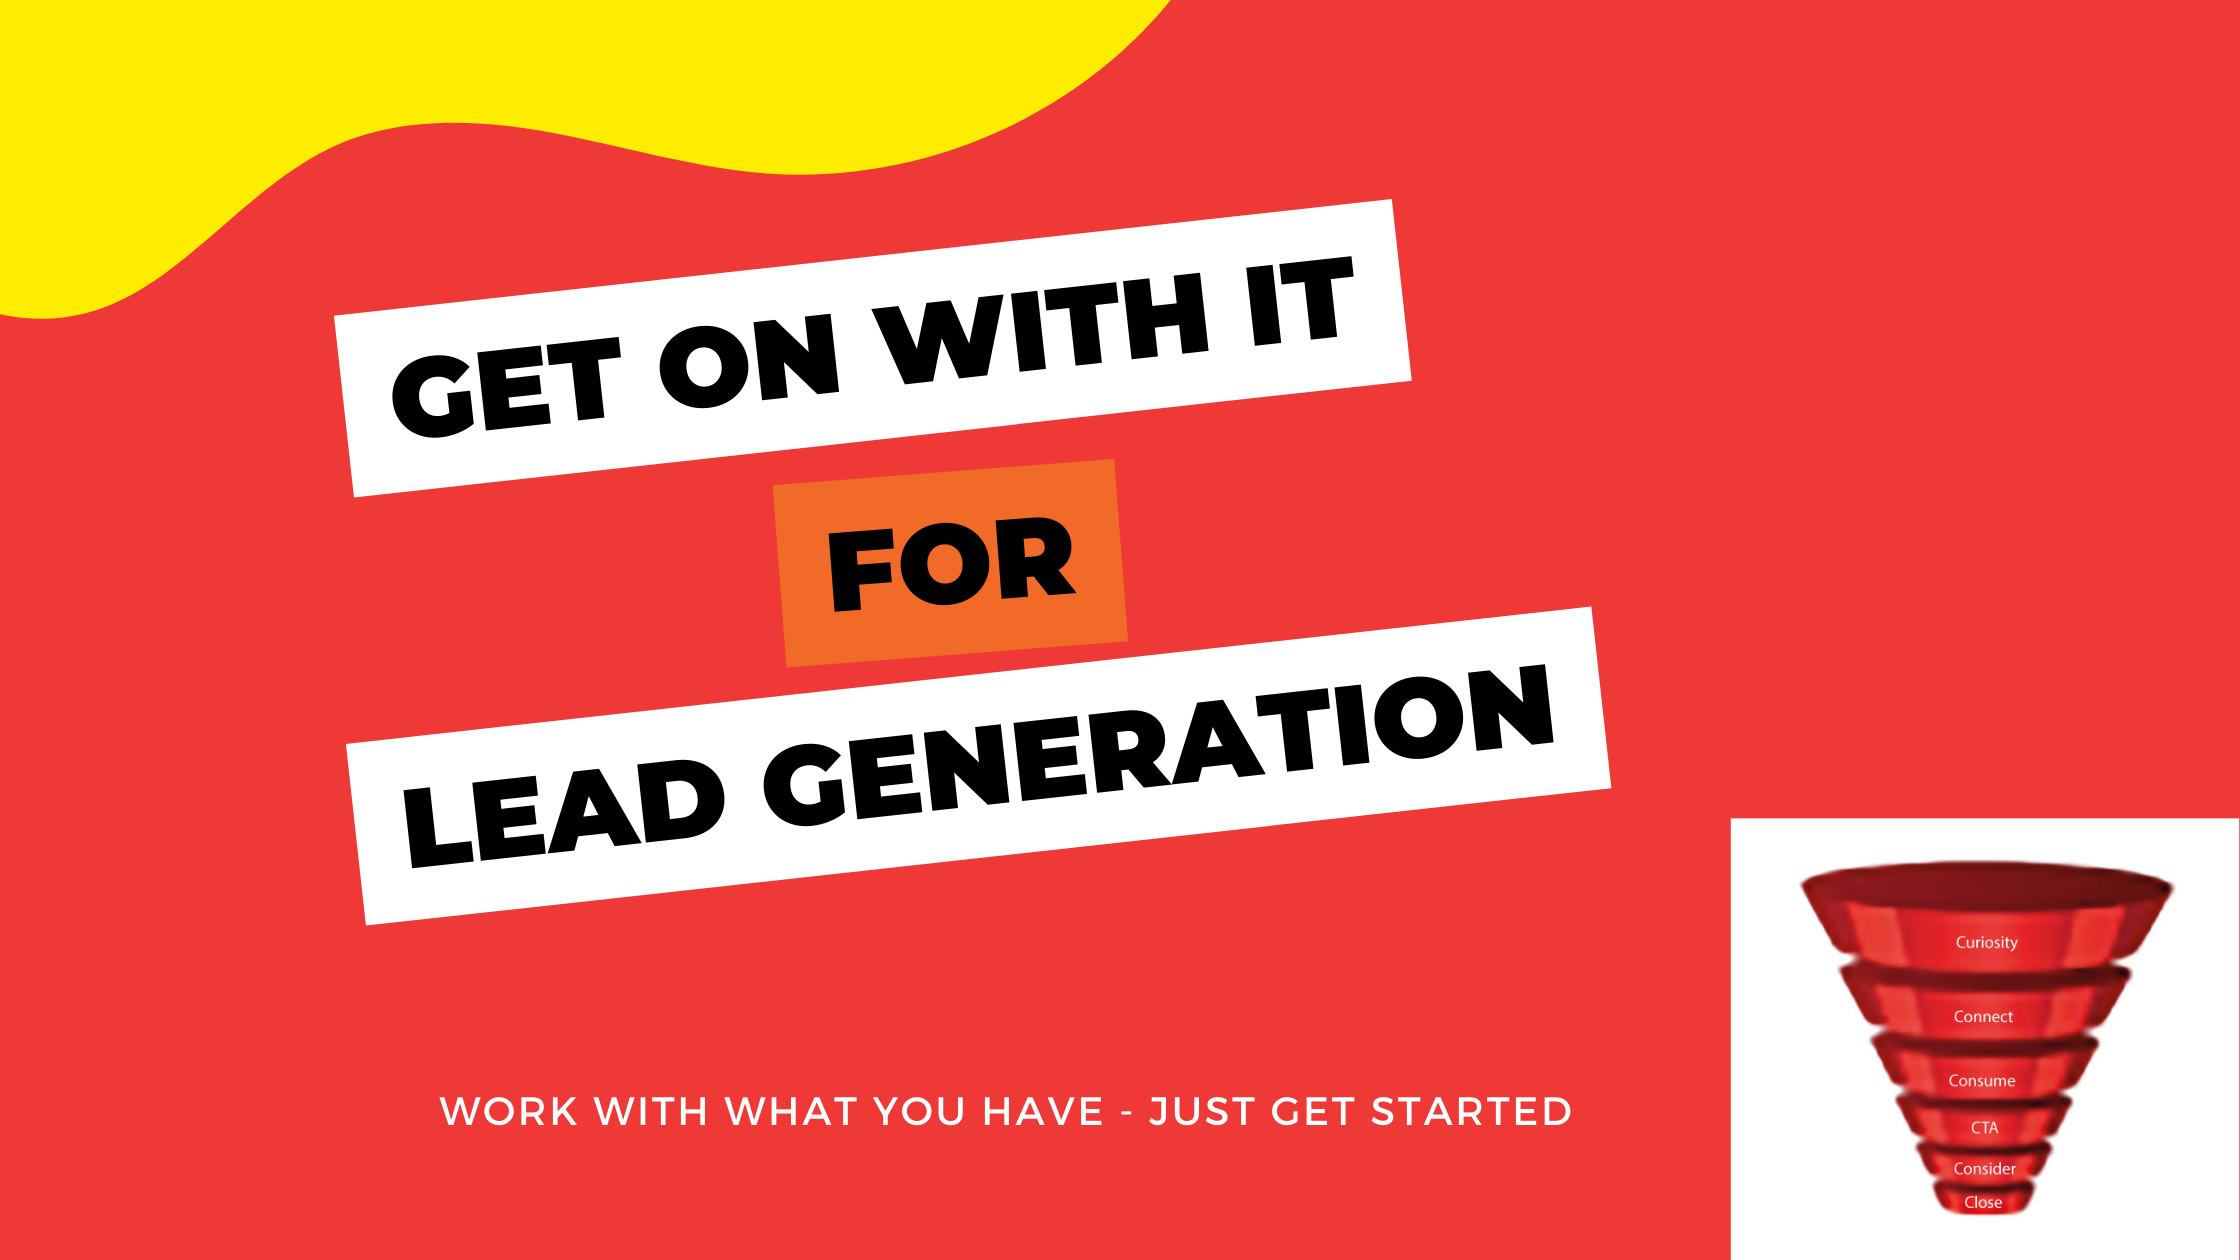 Get on with it, work with what you have, connect with people as a human being, that is how you start your lead generation journey.